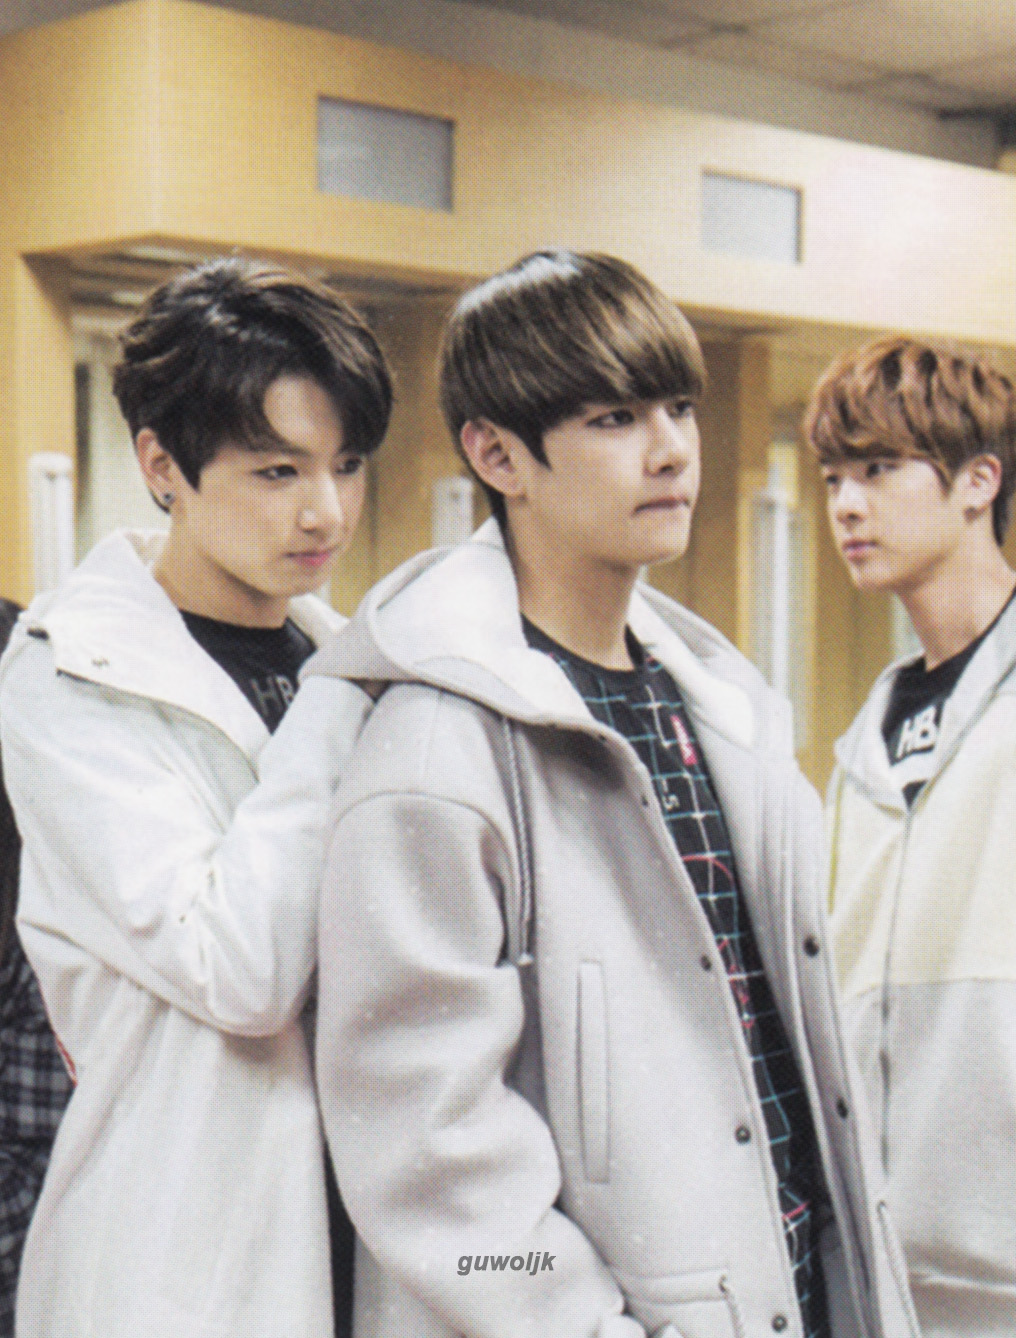 bts scan and archive :: 2015 MEMORIES OF BTS